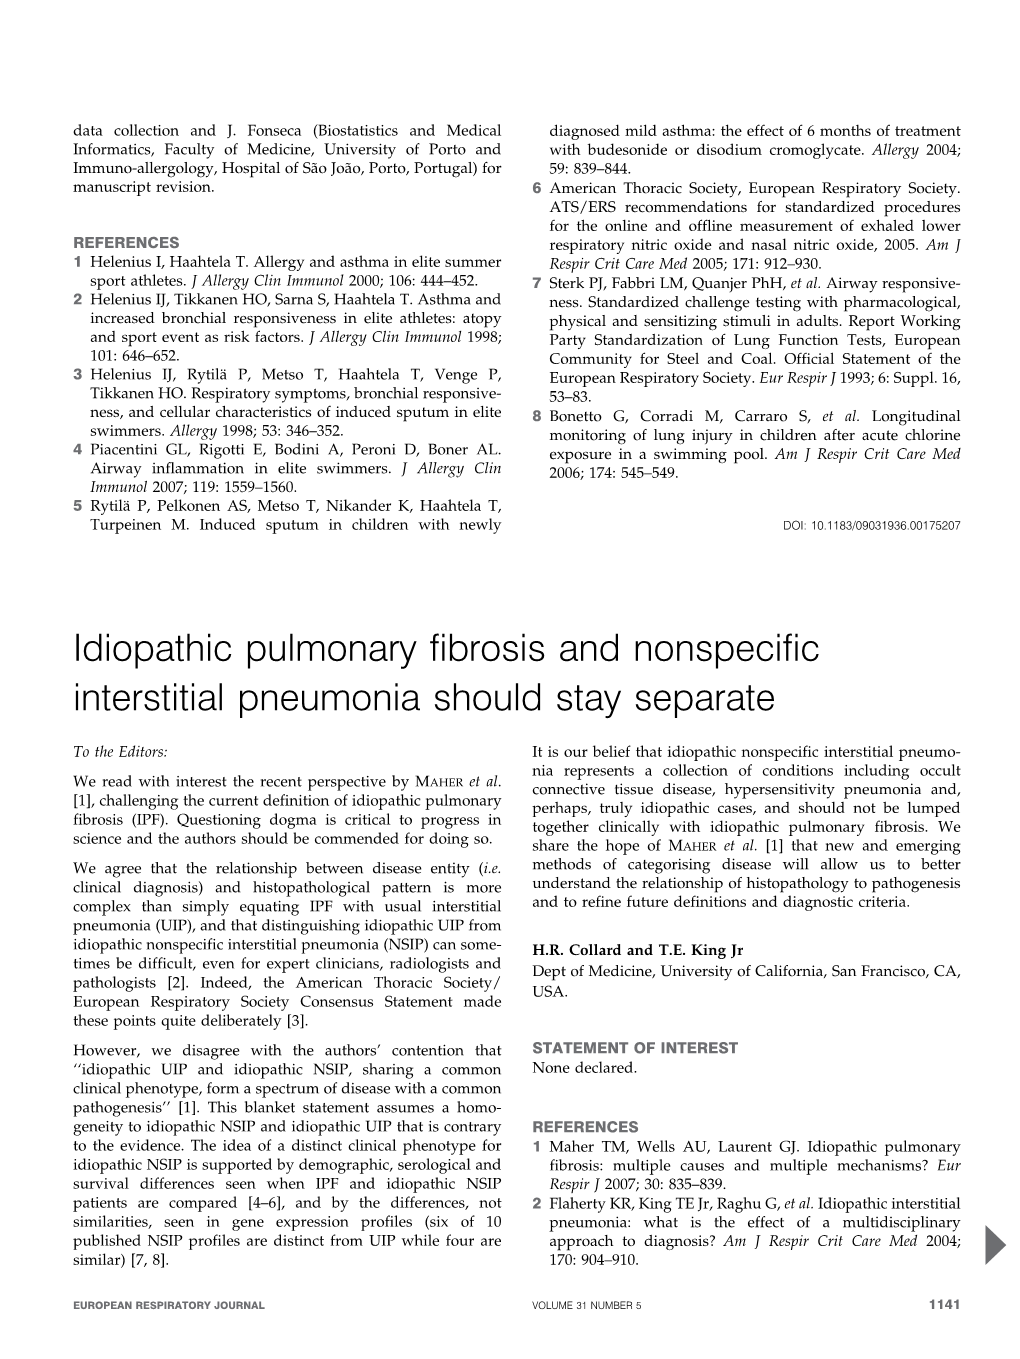 Idiopathic Pulmonary Fibrosis and Nonspecific Interstitial Pneumonia Should Stay Separate